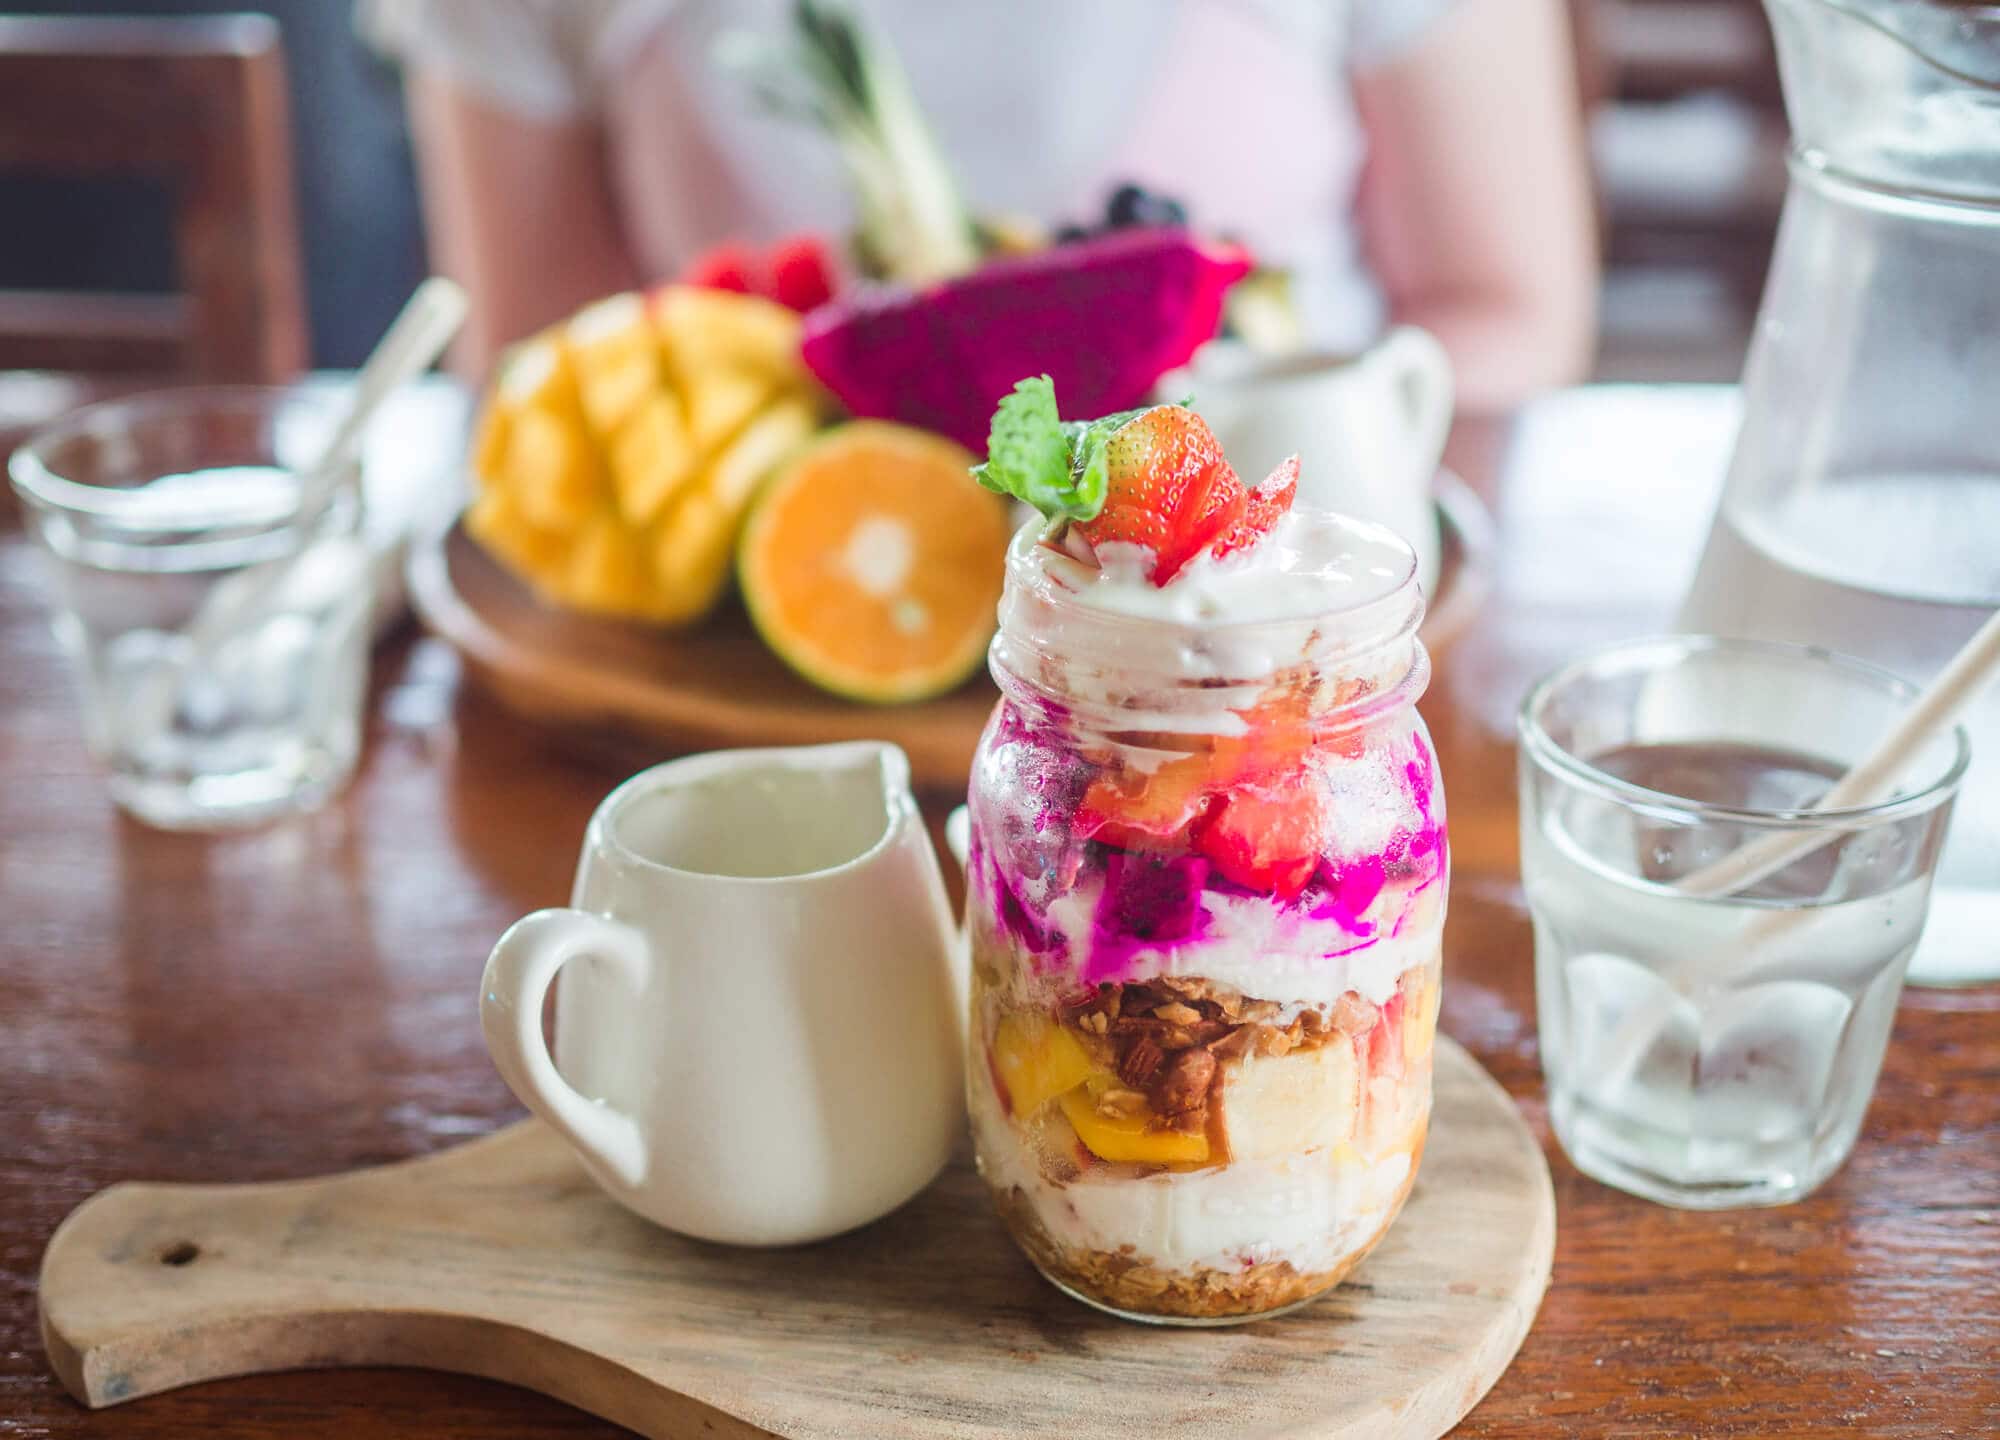 Parfait with pink dragonfruit and granola served in a glass with a large fruit platter in the background in Bukit Café, one of the best places to have breakfast in Uluwatu during your two weeks in Bali.